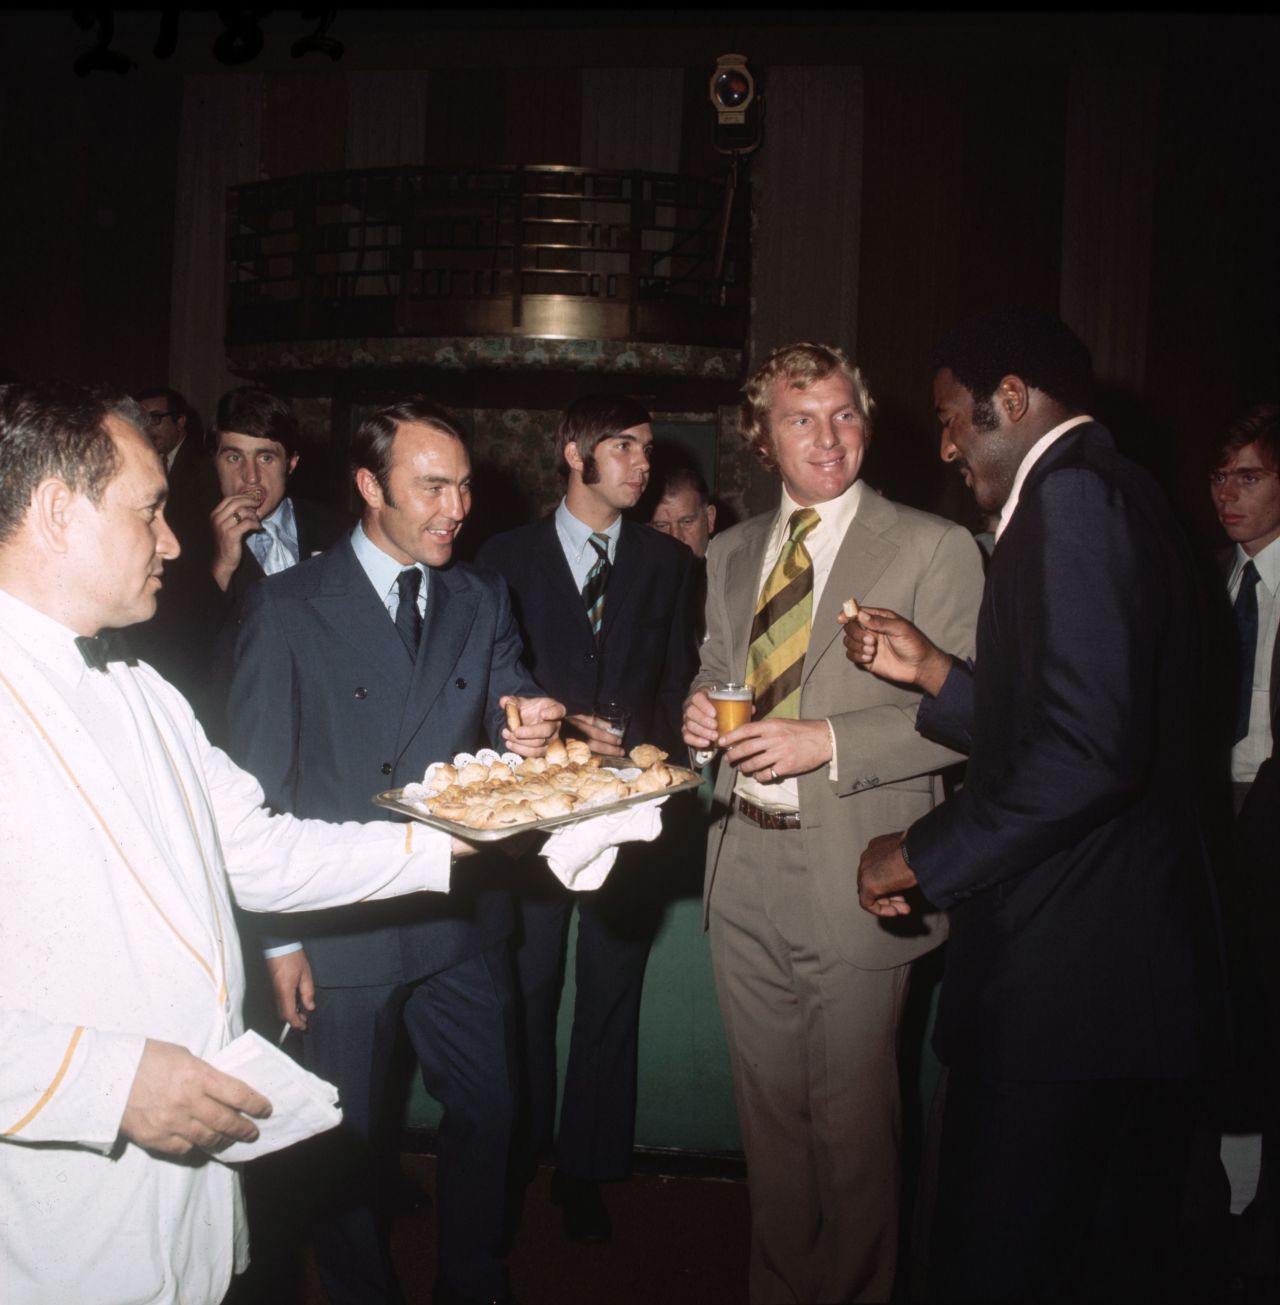 Best is seen here alongside West Ham legend Bobby Moore (center right) in the 1970s. Moore captained his country to World Cup glory when the competition was held in England in 1966.